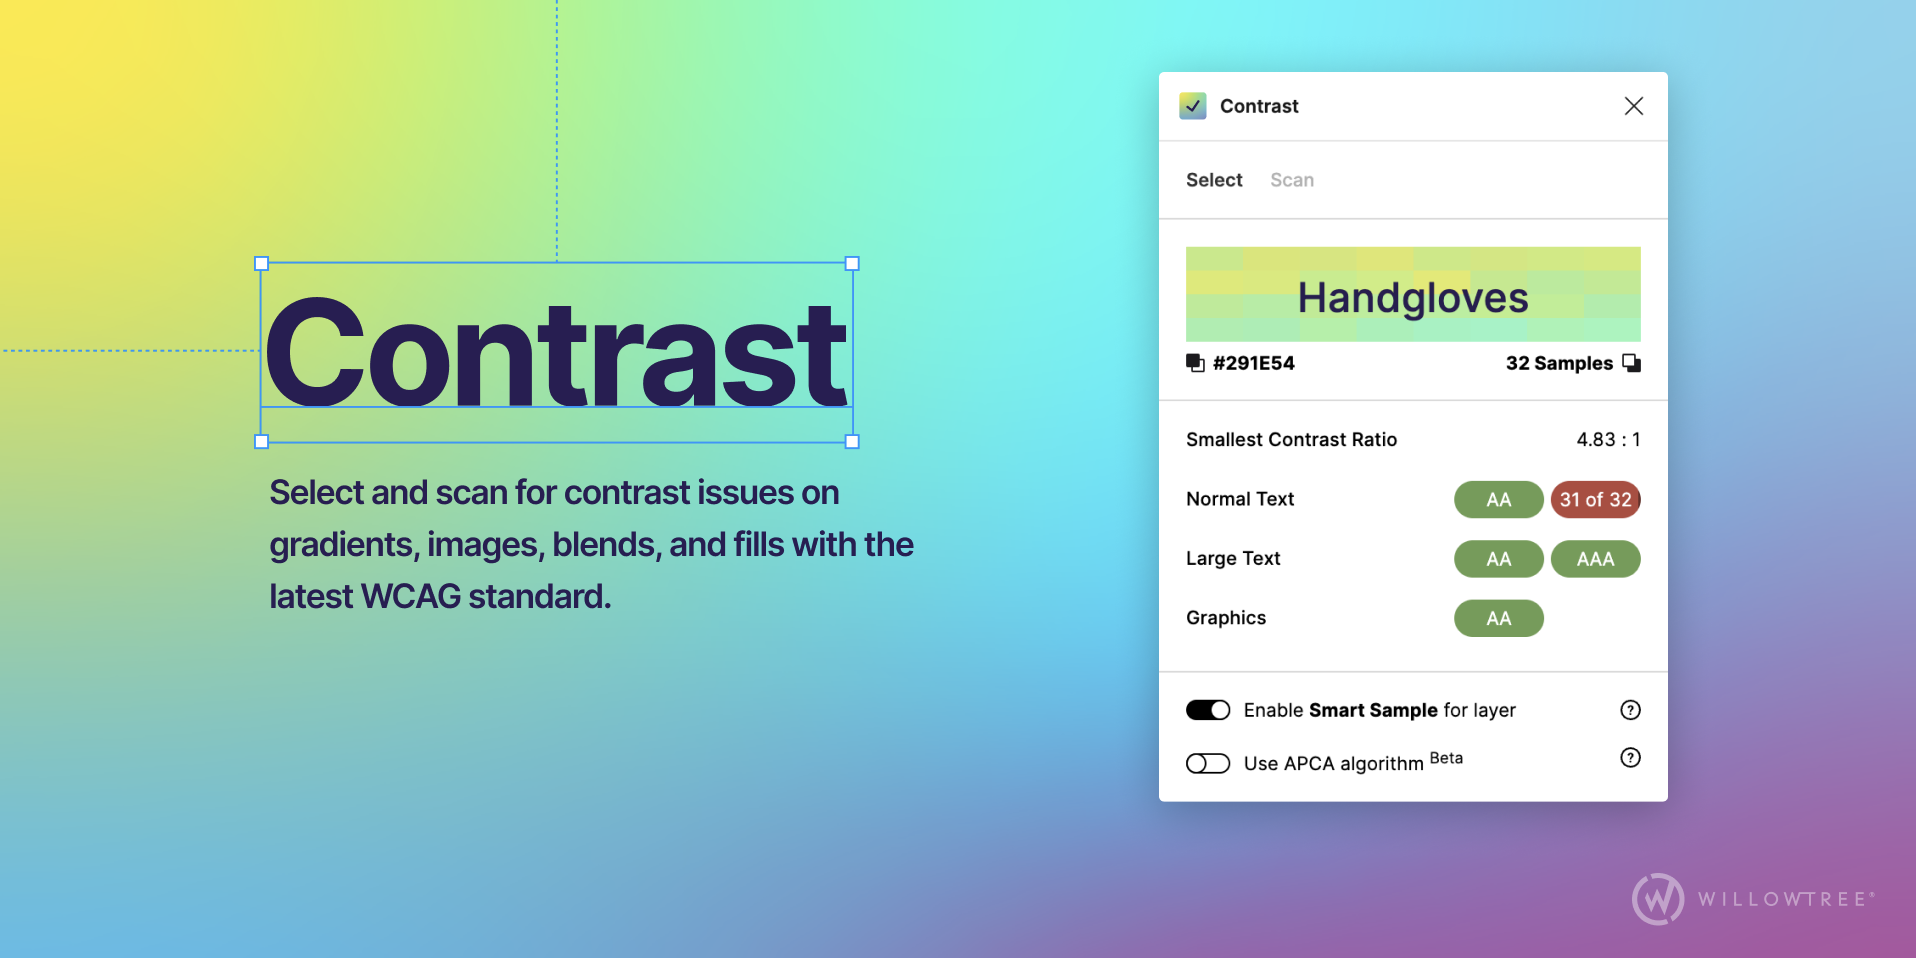 Easily modify the contrast of your images by accessing the app's dedicated contrast button to ensure your text and background meet the latest WCAG standard.